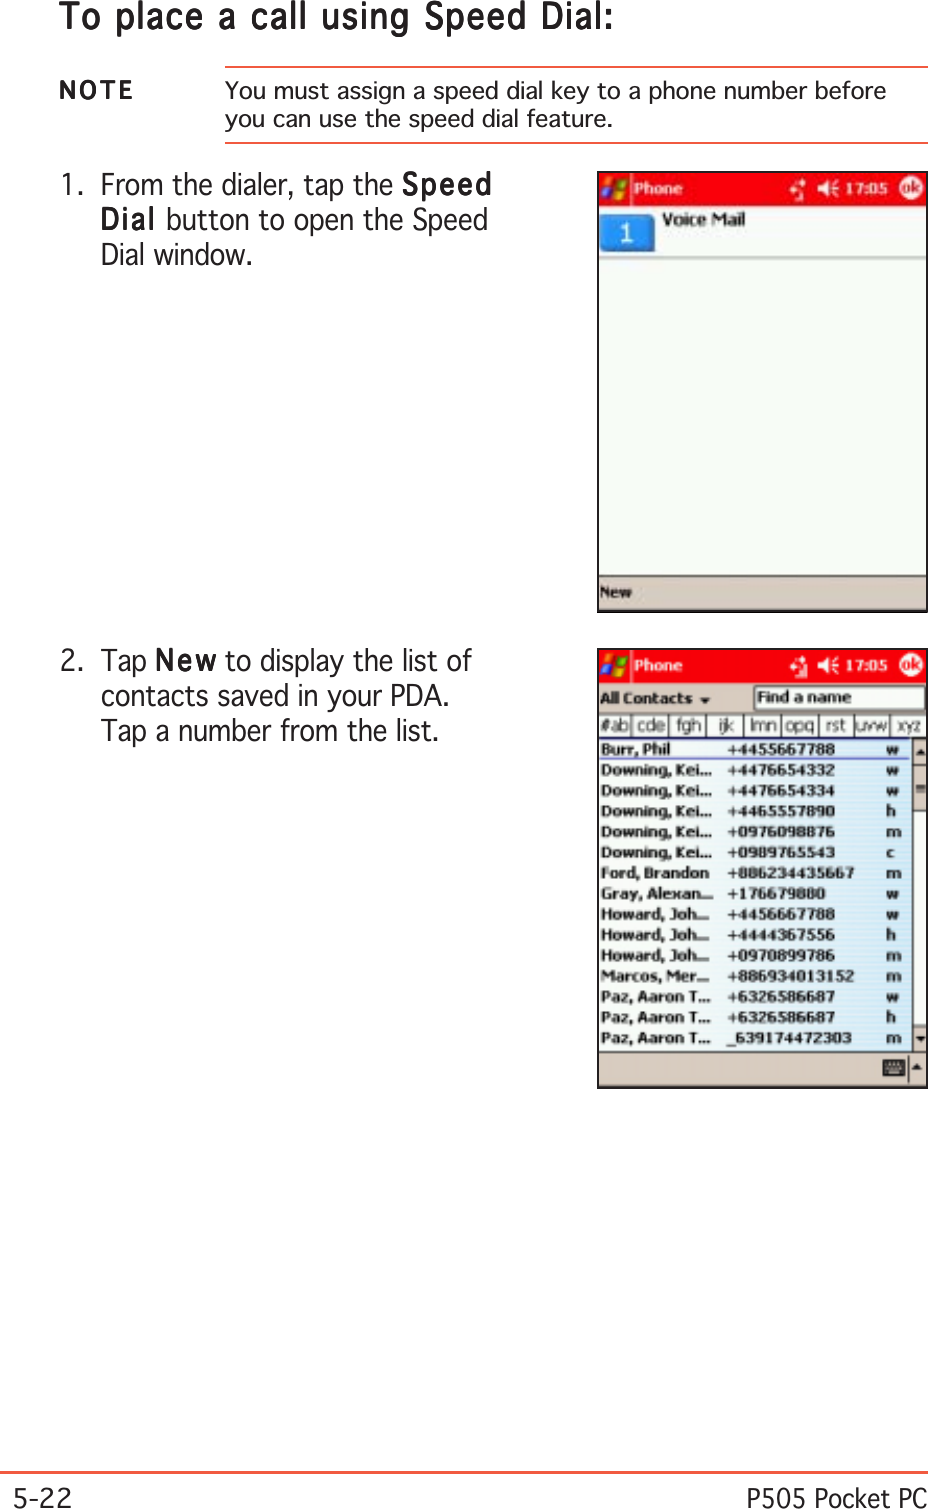 5-22P505 Pocket PCTo place a call using Speed Dial:To place a call using Speed Dial:To place a call using Speed Dial:To place a call using Speed Dial:To place a call using Speed Dial:2. Tap NewNewNewNewN e w to display the list ofcontacts saved in your PDA.Tap a number from the list.1. From the dialer, tap the SpeedSpeedSpeedSpeedSpeedDialDialDialDialDia l button to open the SpeedDial window.NOTENOTENOTENOTEN O T E You must assign a speed dial key to a phone number beforeyou can use the speed dial feature.